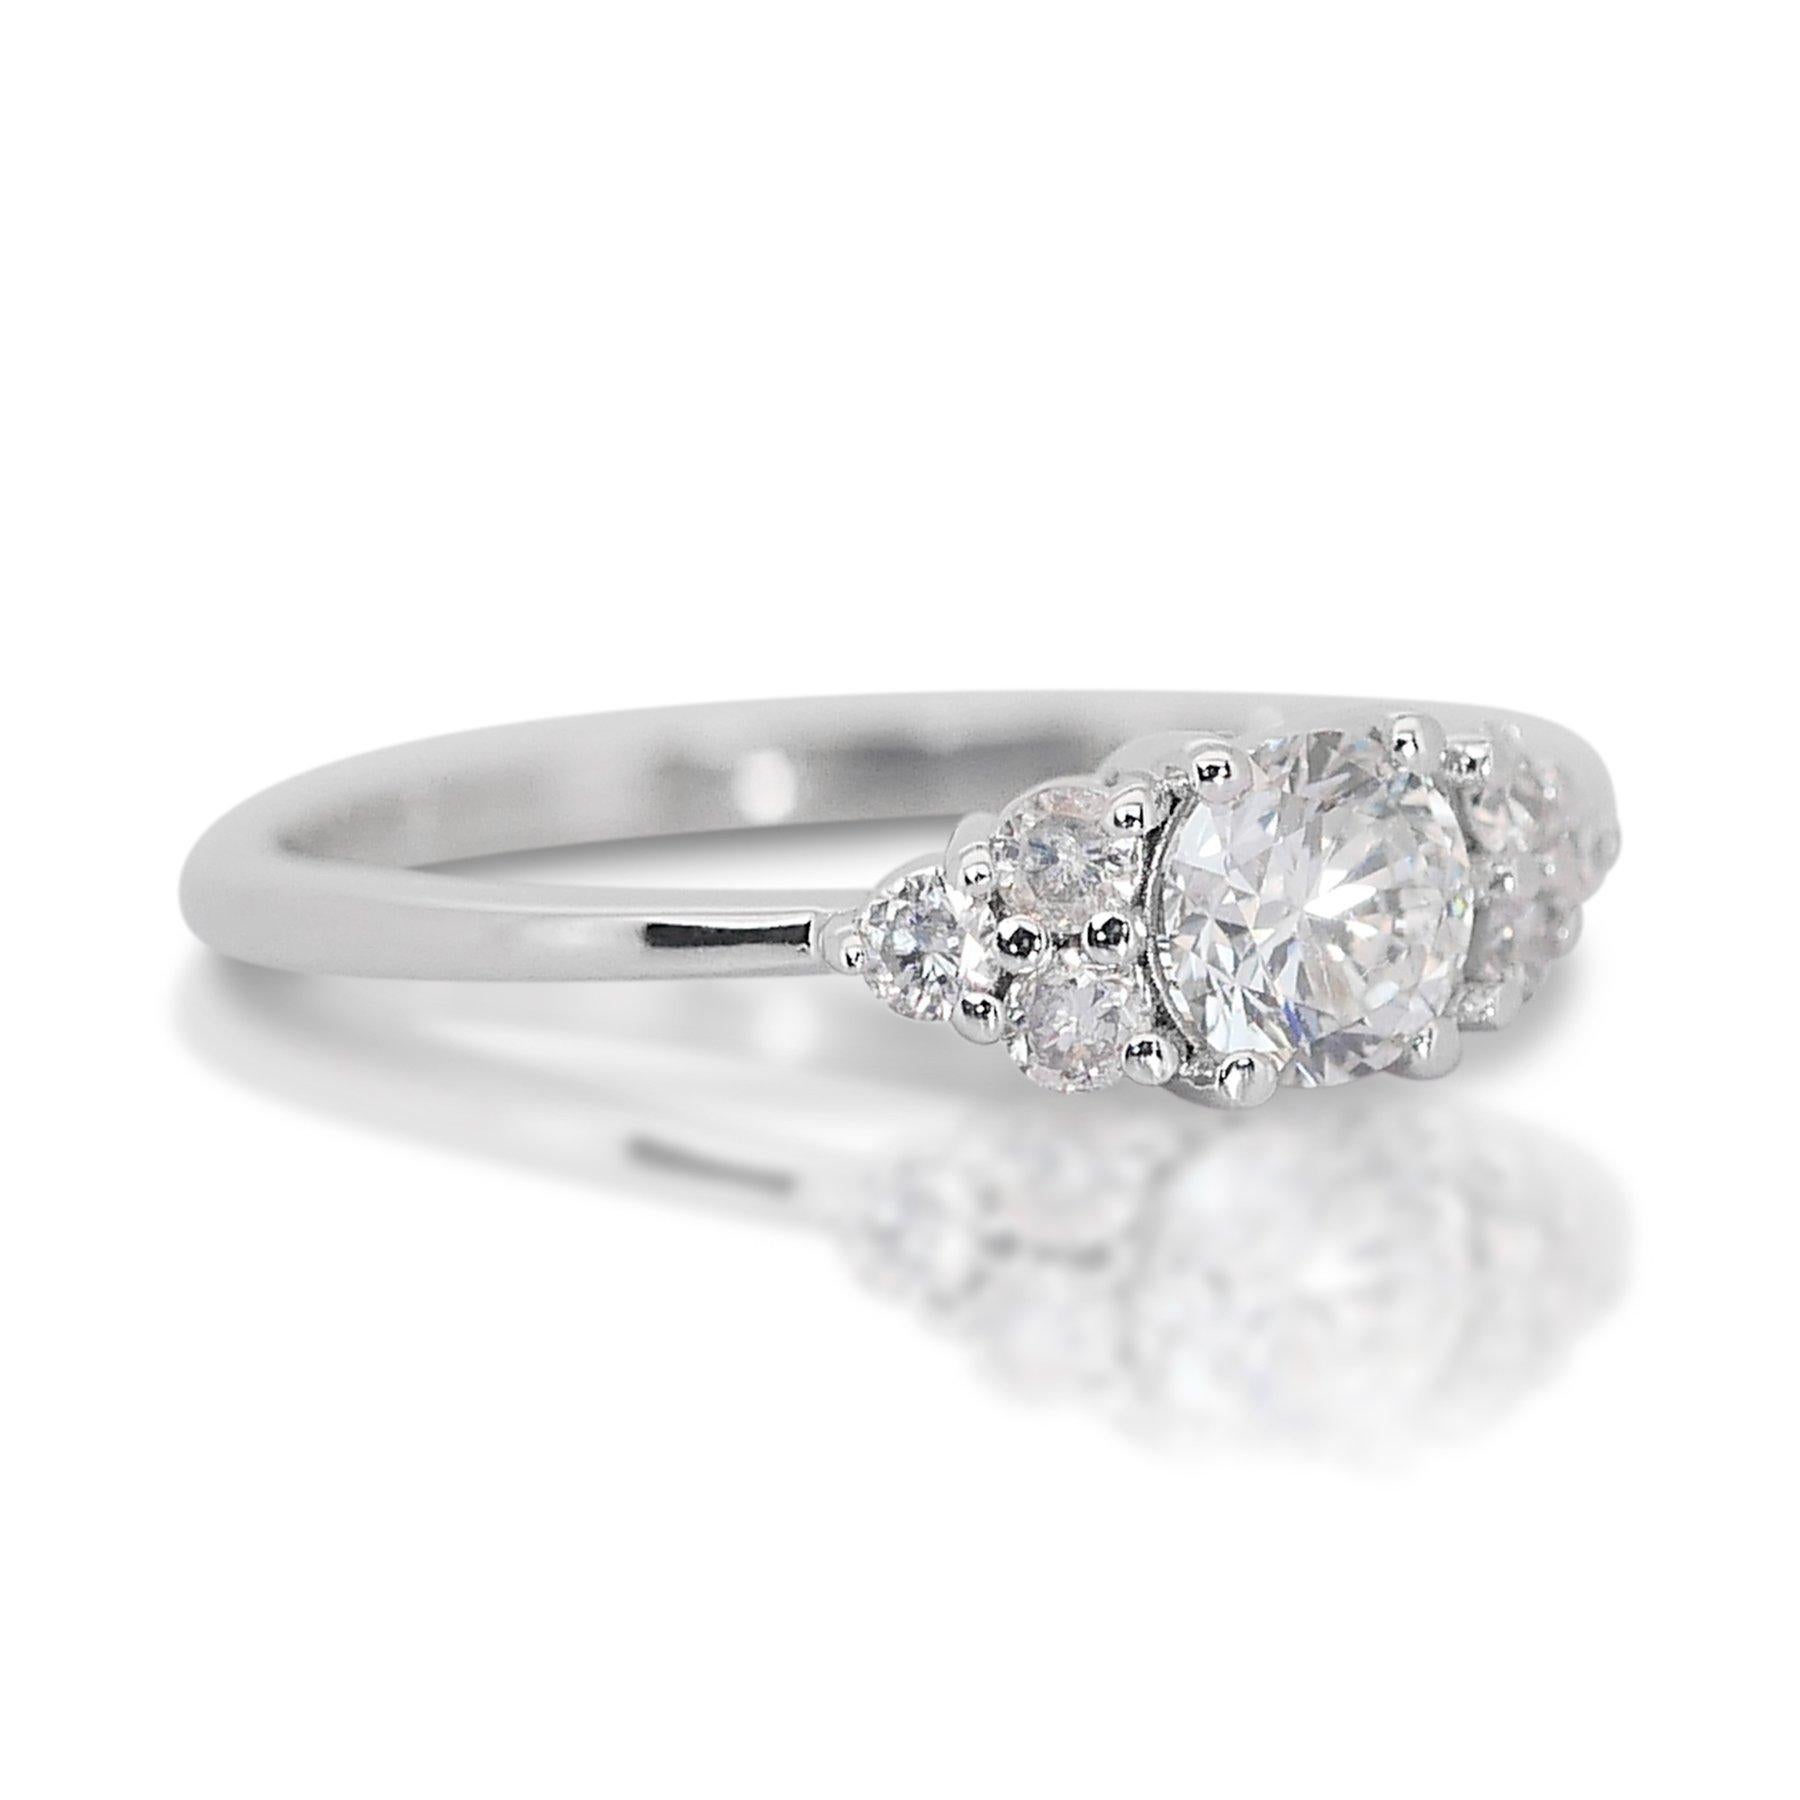 Captivating 1.25ct Diamonds 7-Stone Ring in 18k White Gold - GIA Certified

This elegant 7-stone ring, expertly crafted from 18k white gold, features a stunning 1.00-carat main diamond with an exceptional color grade. Complementing the central